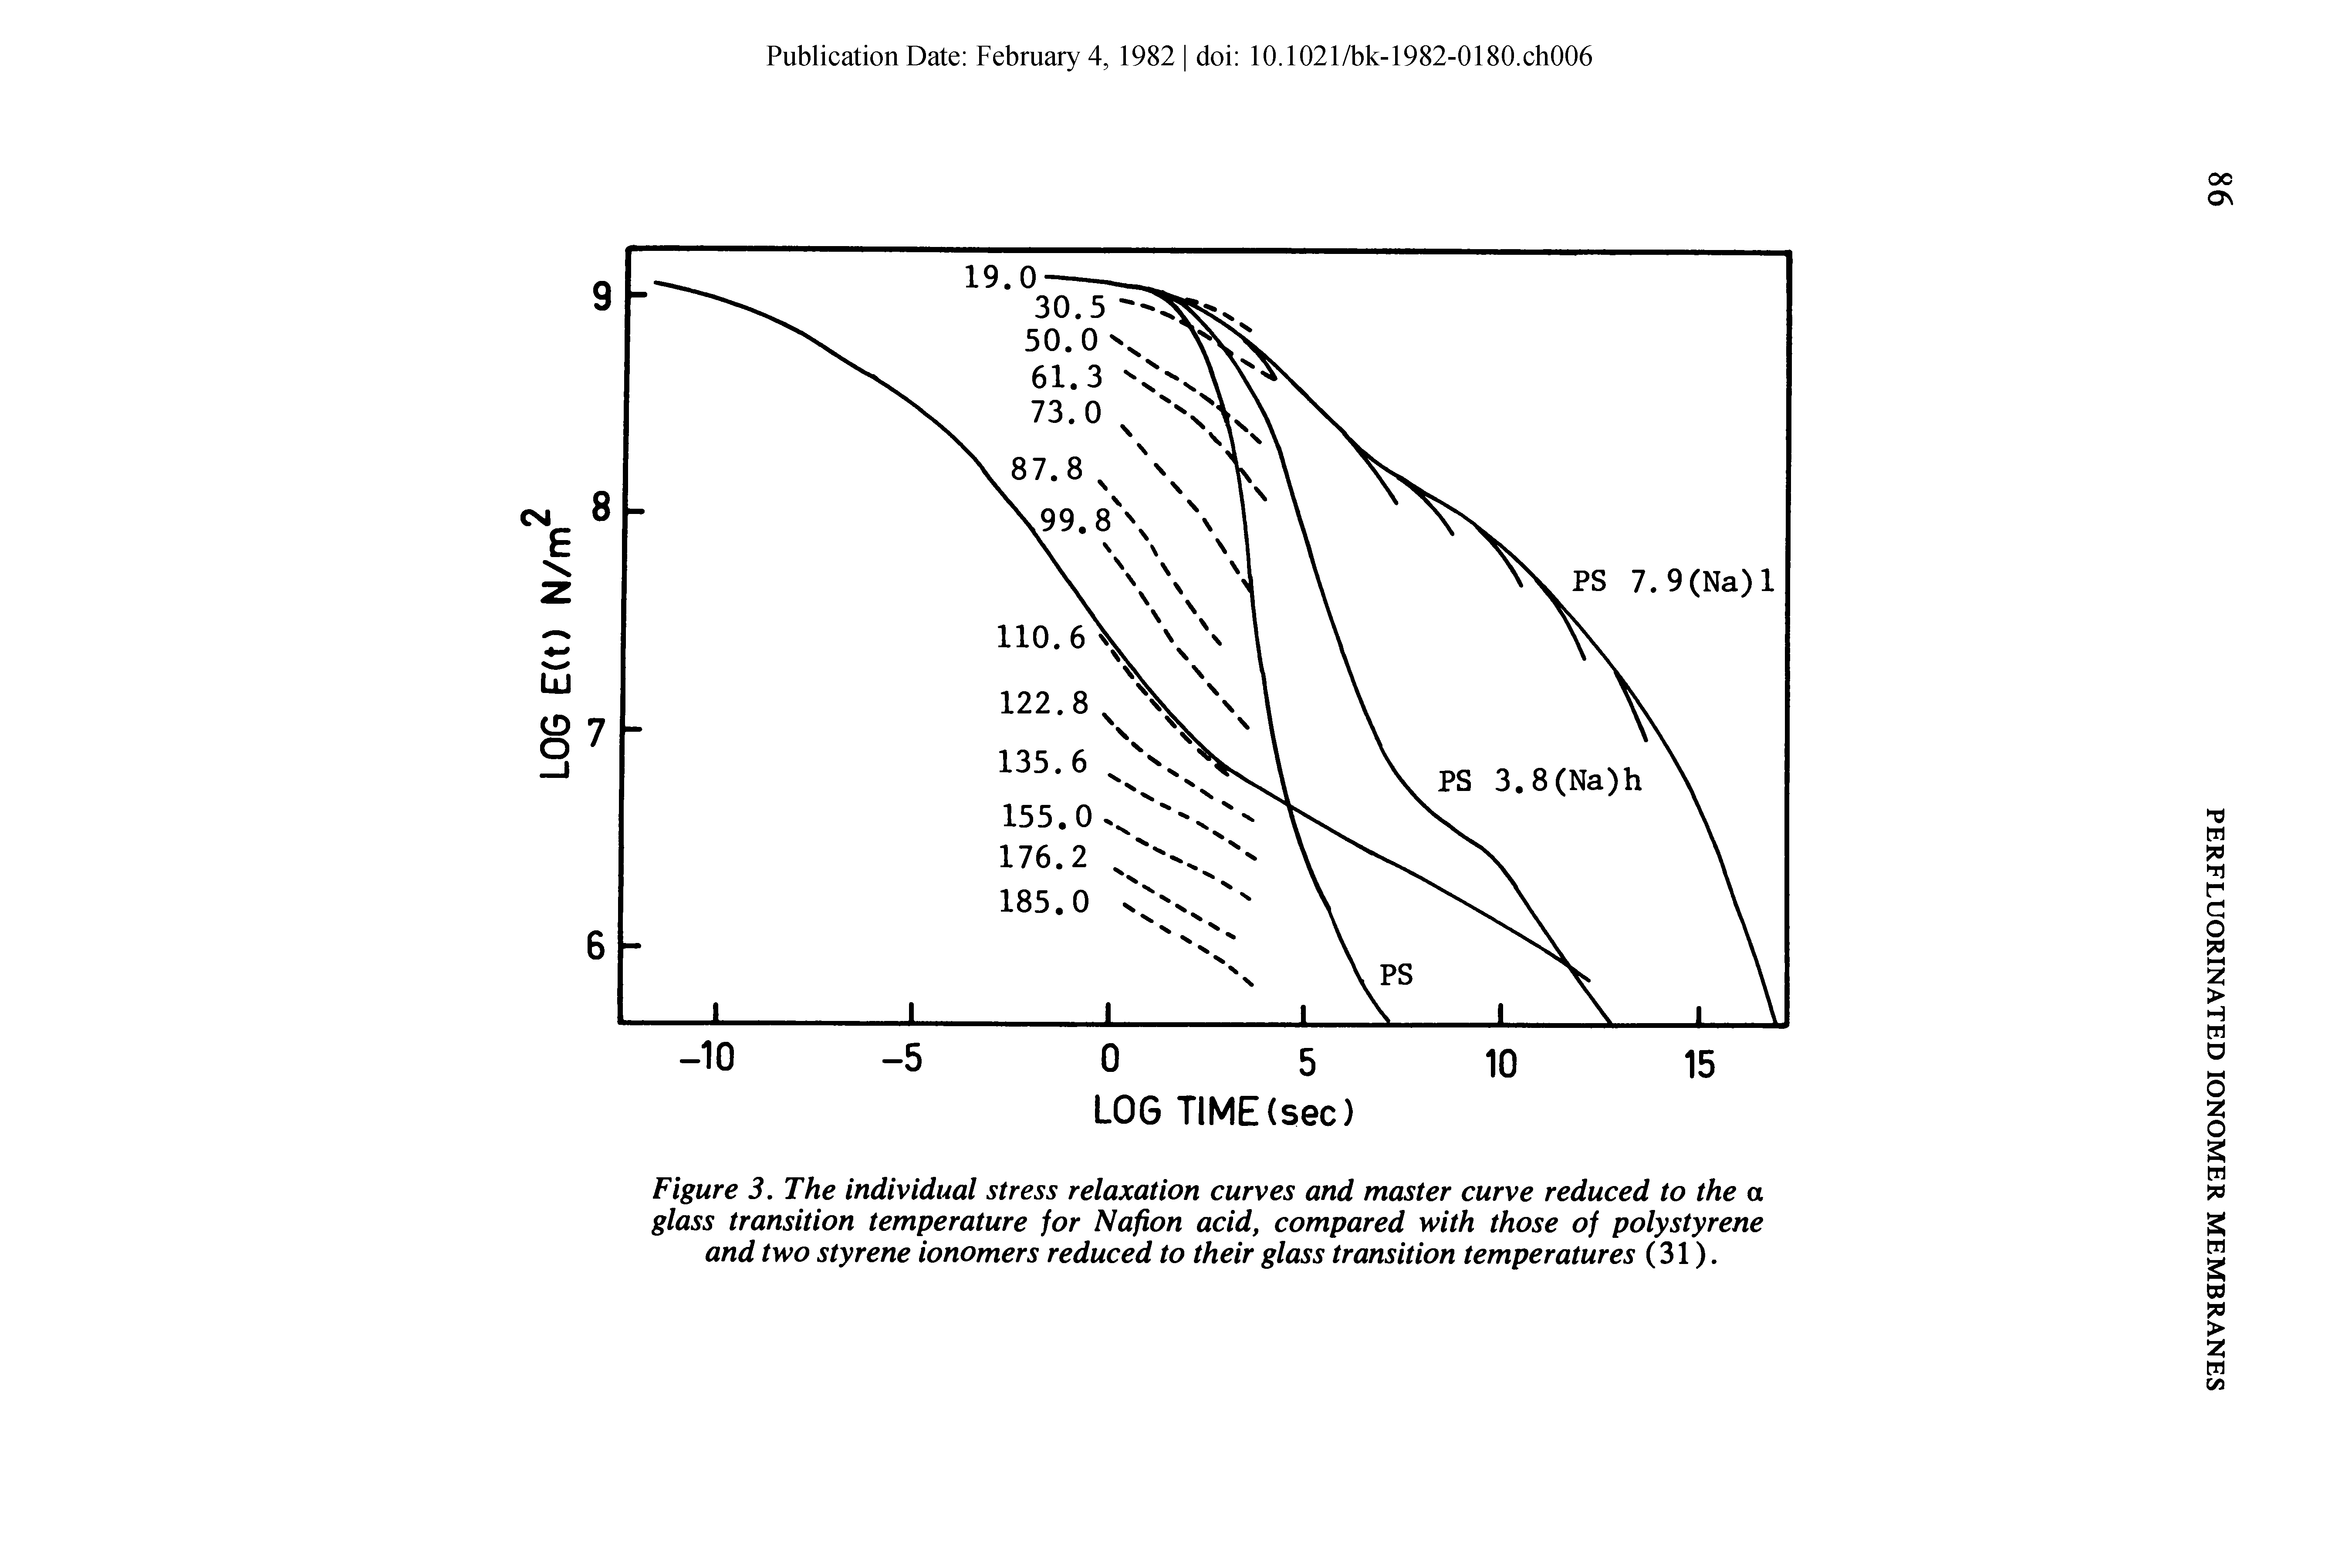 Figure 3. The individual stress relaxation curves and master curve reduced to the a glass transition temperature for Nafion acid, compared with those of polystyrene and two styrene ionomers reduced to their glass transition temperatures (31).